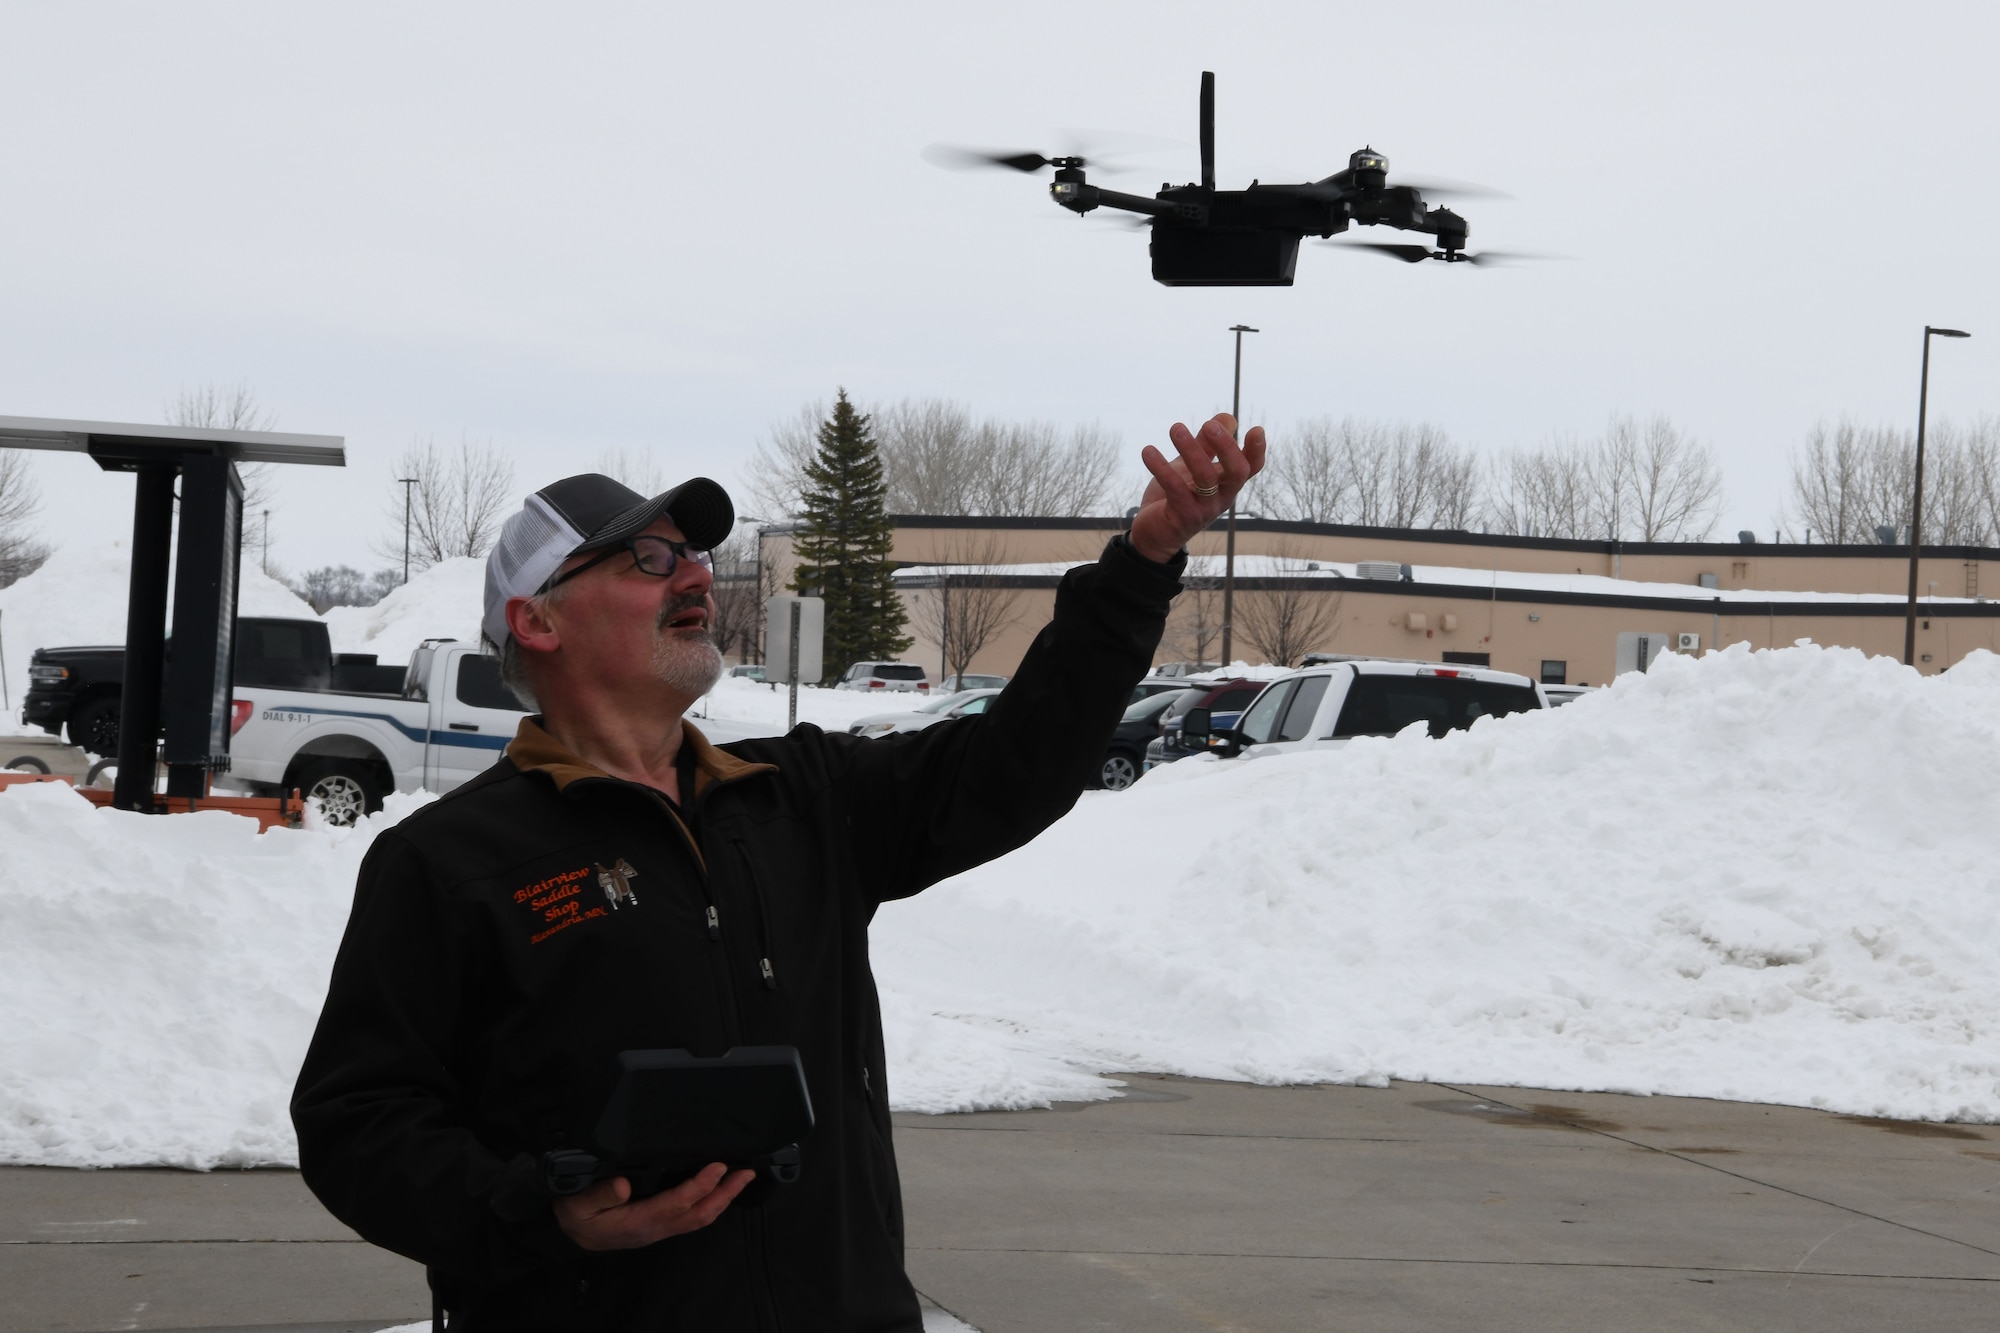 Man in black jacket catches reaches for flying drone.